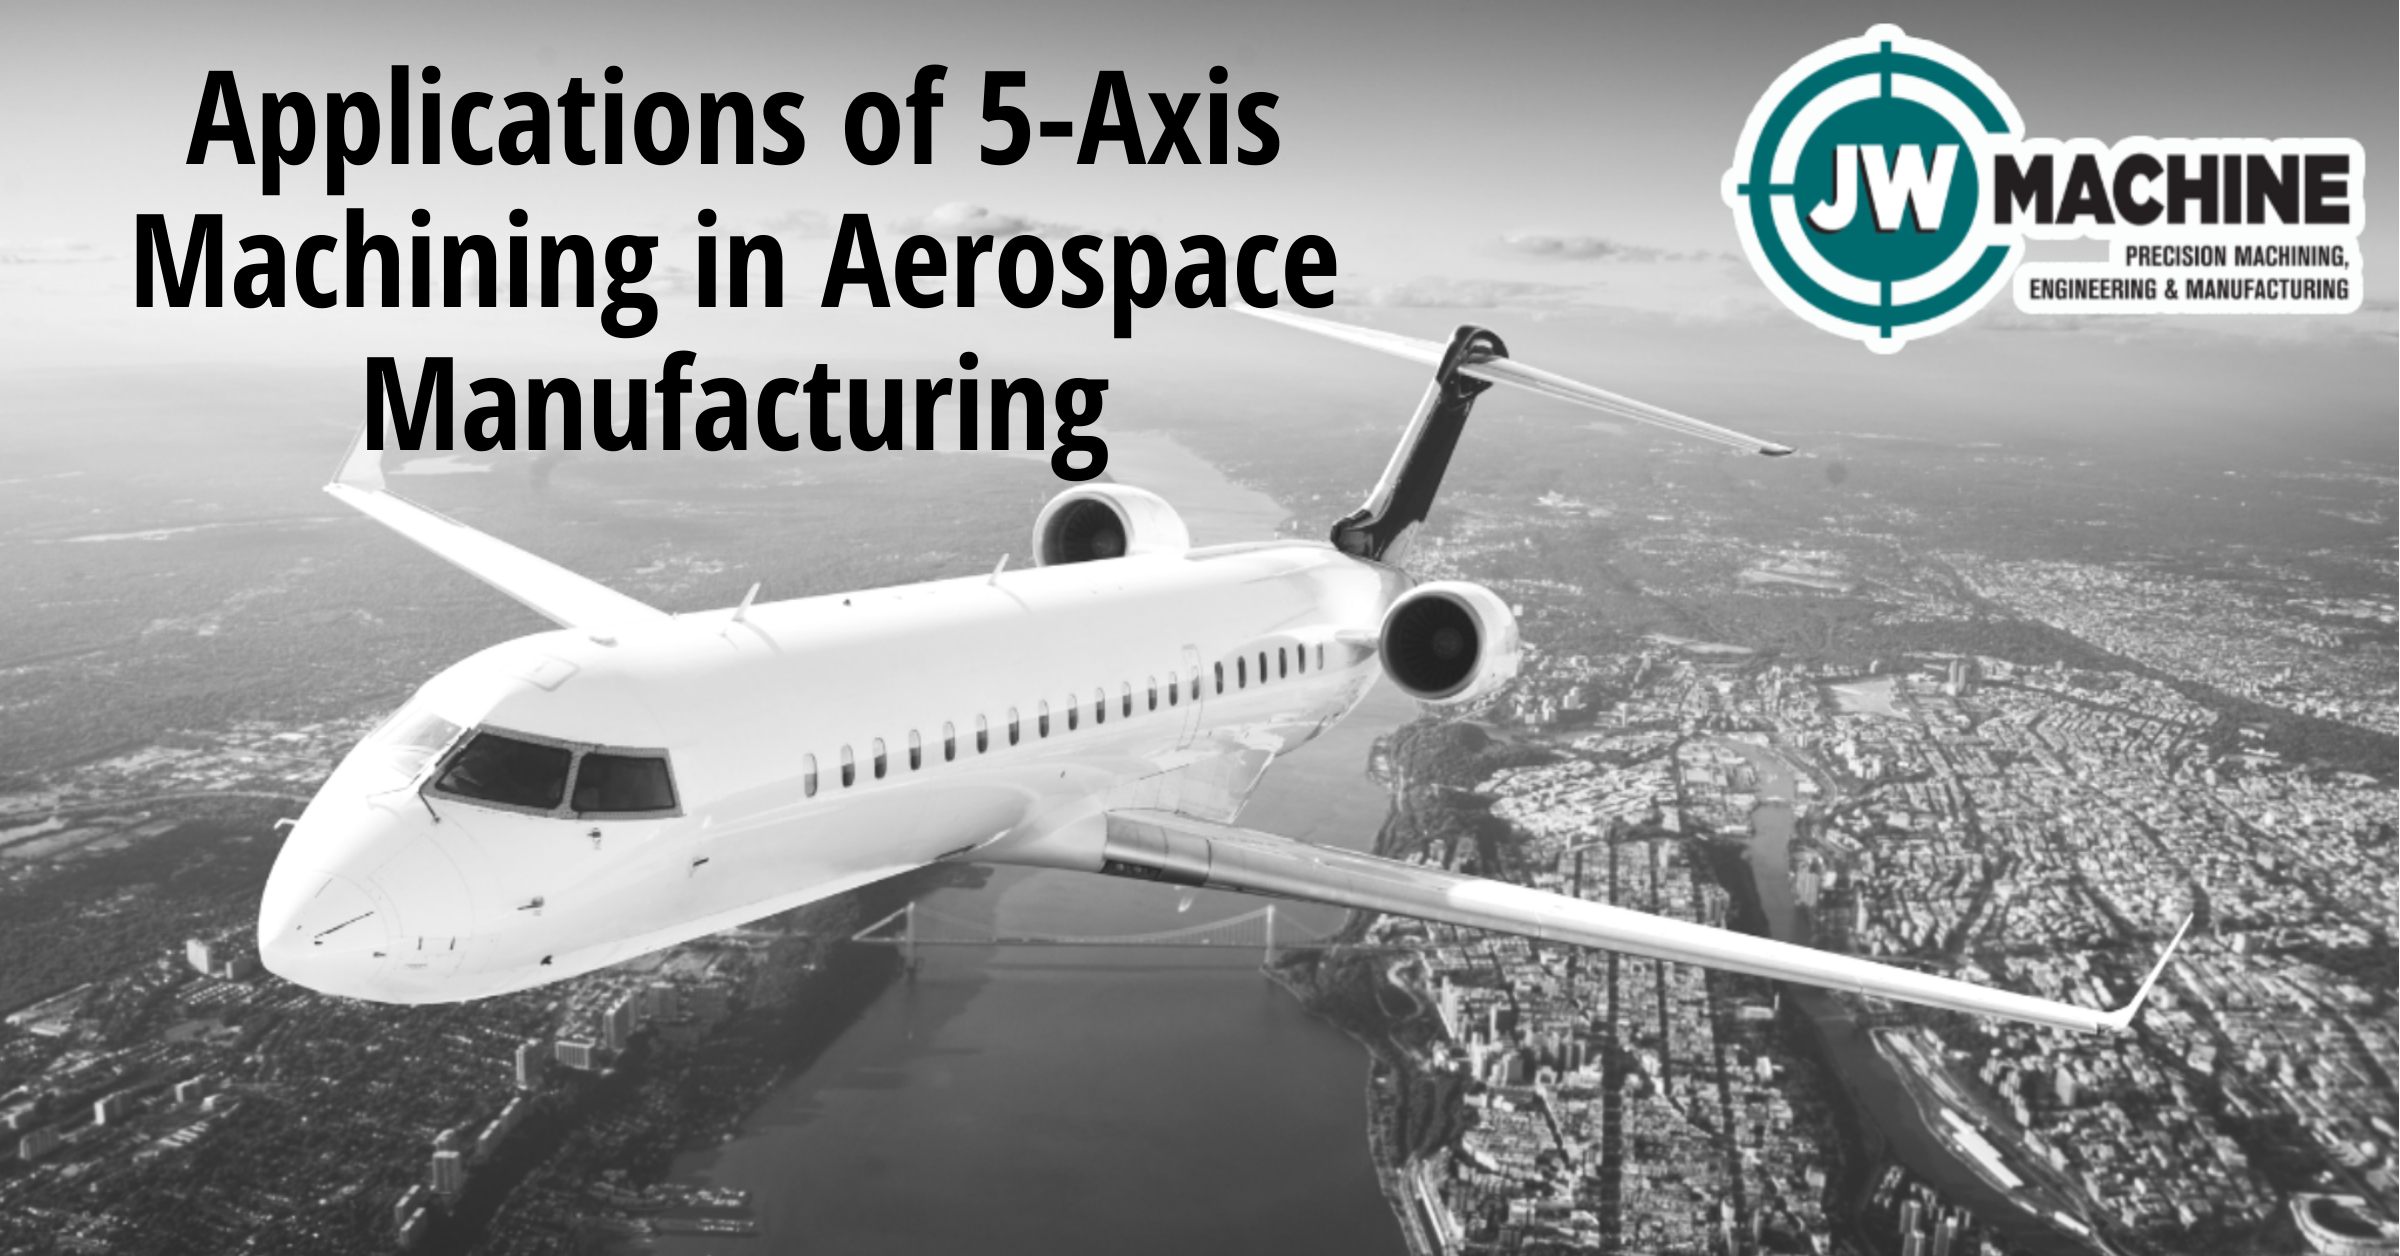 Applications of 5-Axis Machining in Aerospace Manufacturing 